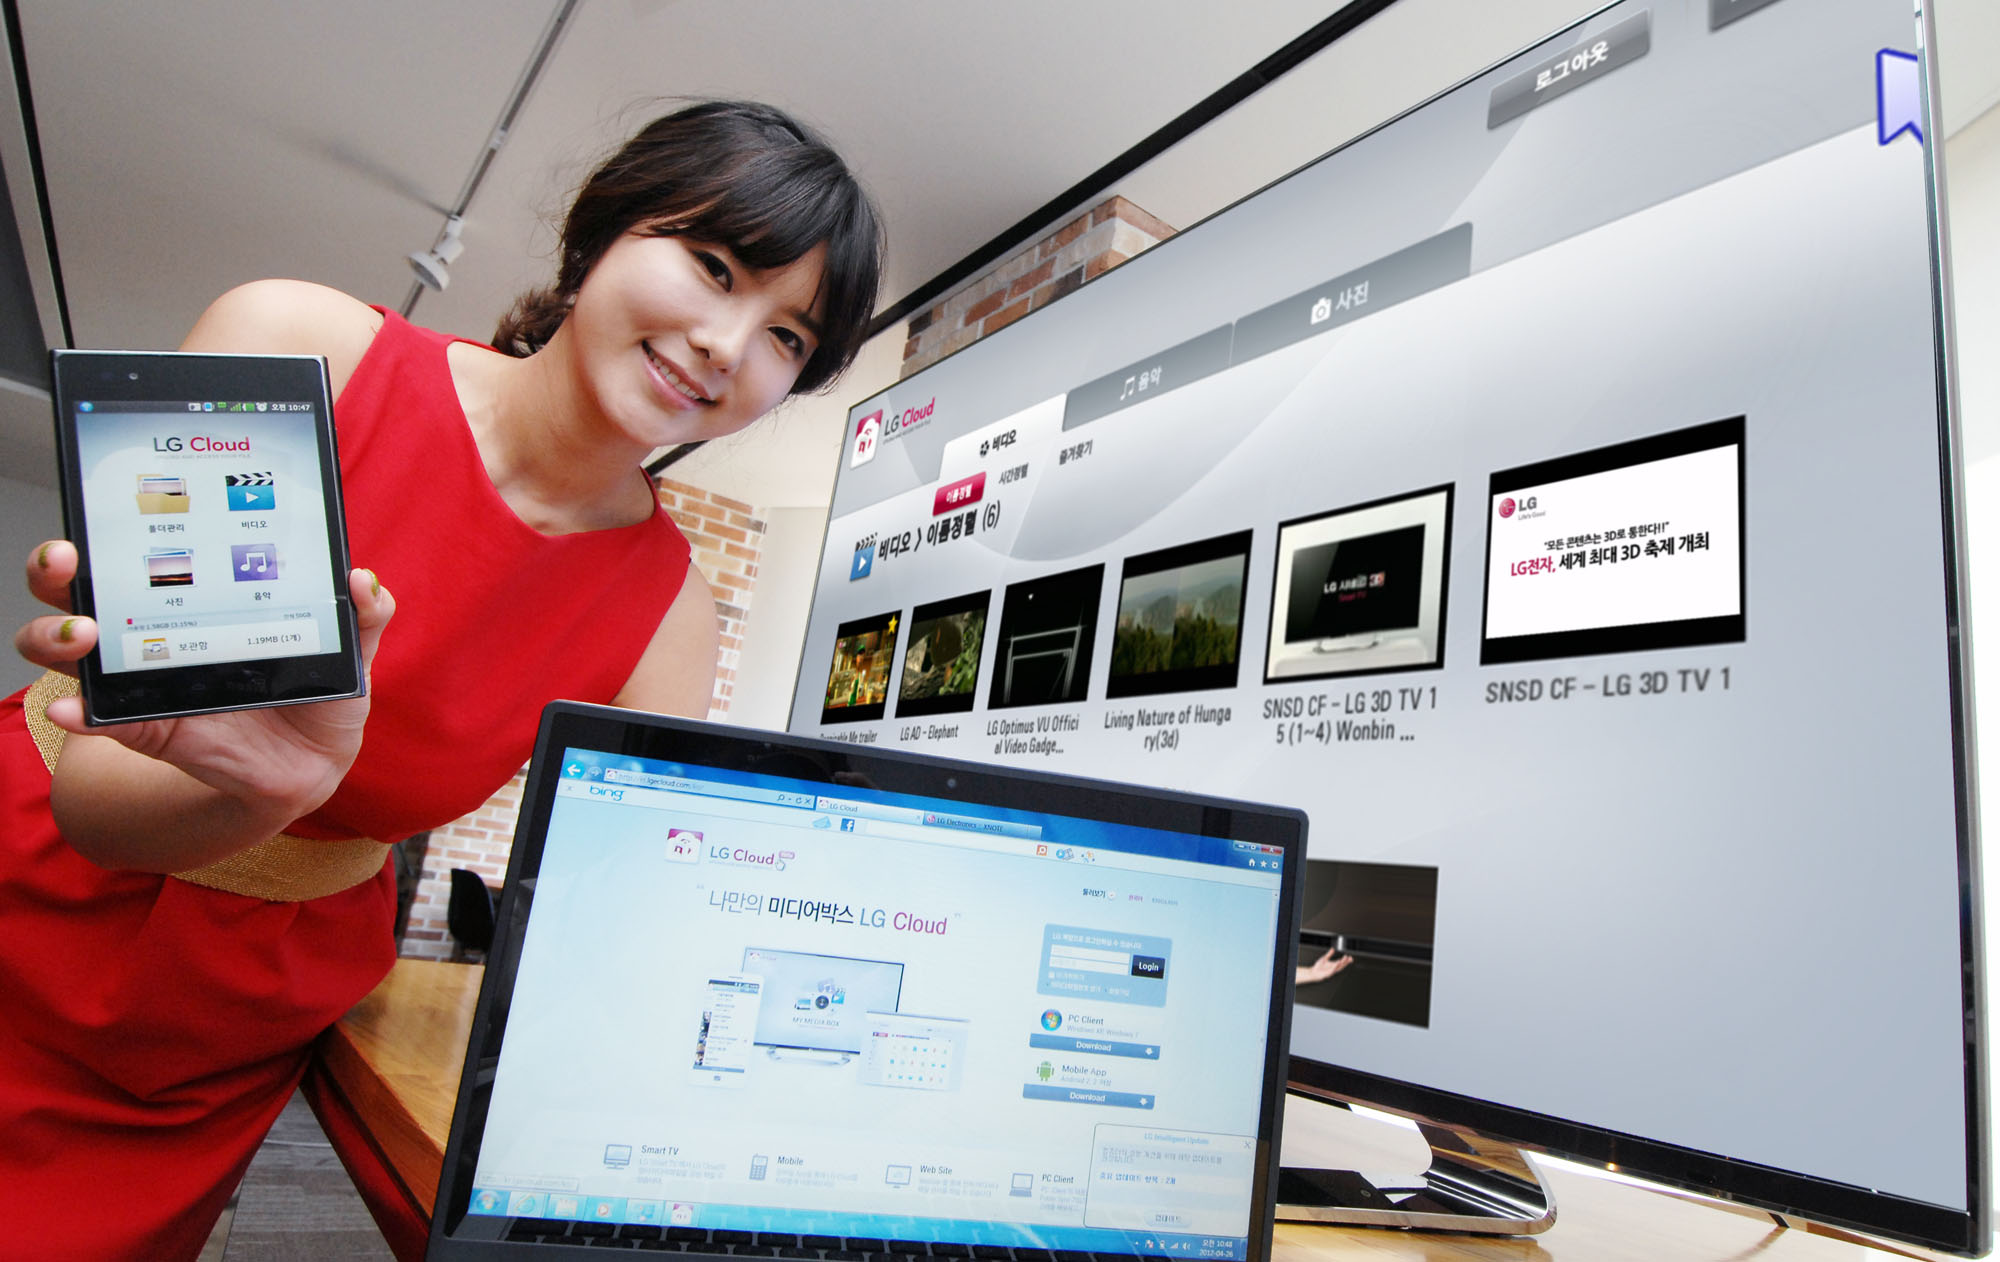 A model introduces the LG Cloud service which is compatible with TVs, mobile devices and PCs while standing up